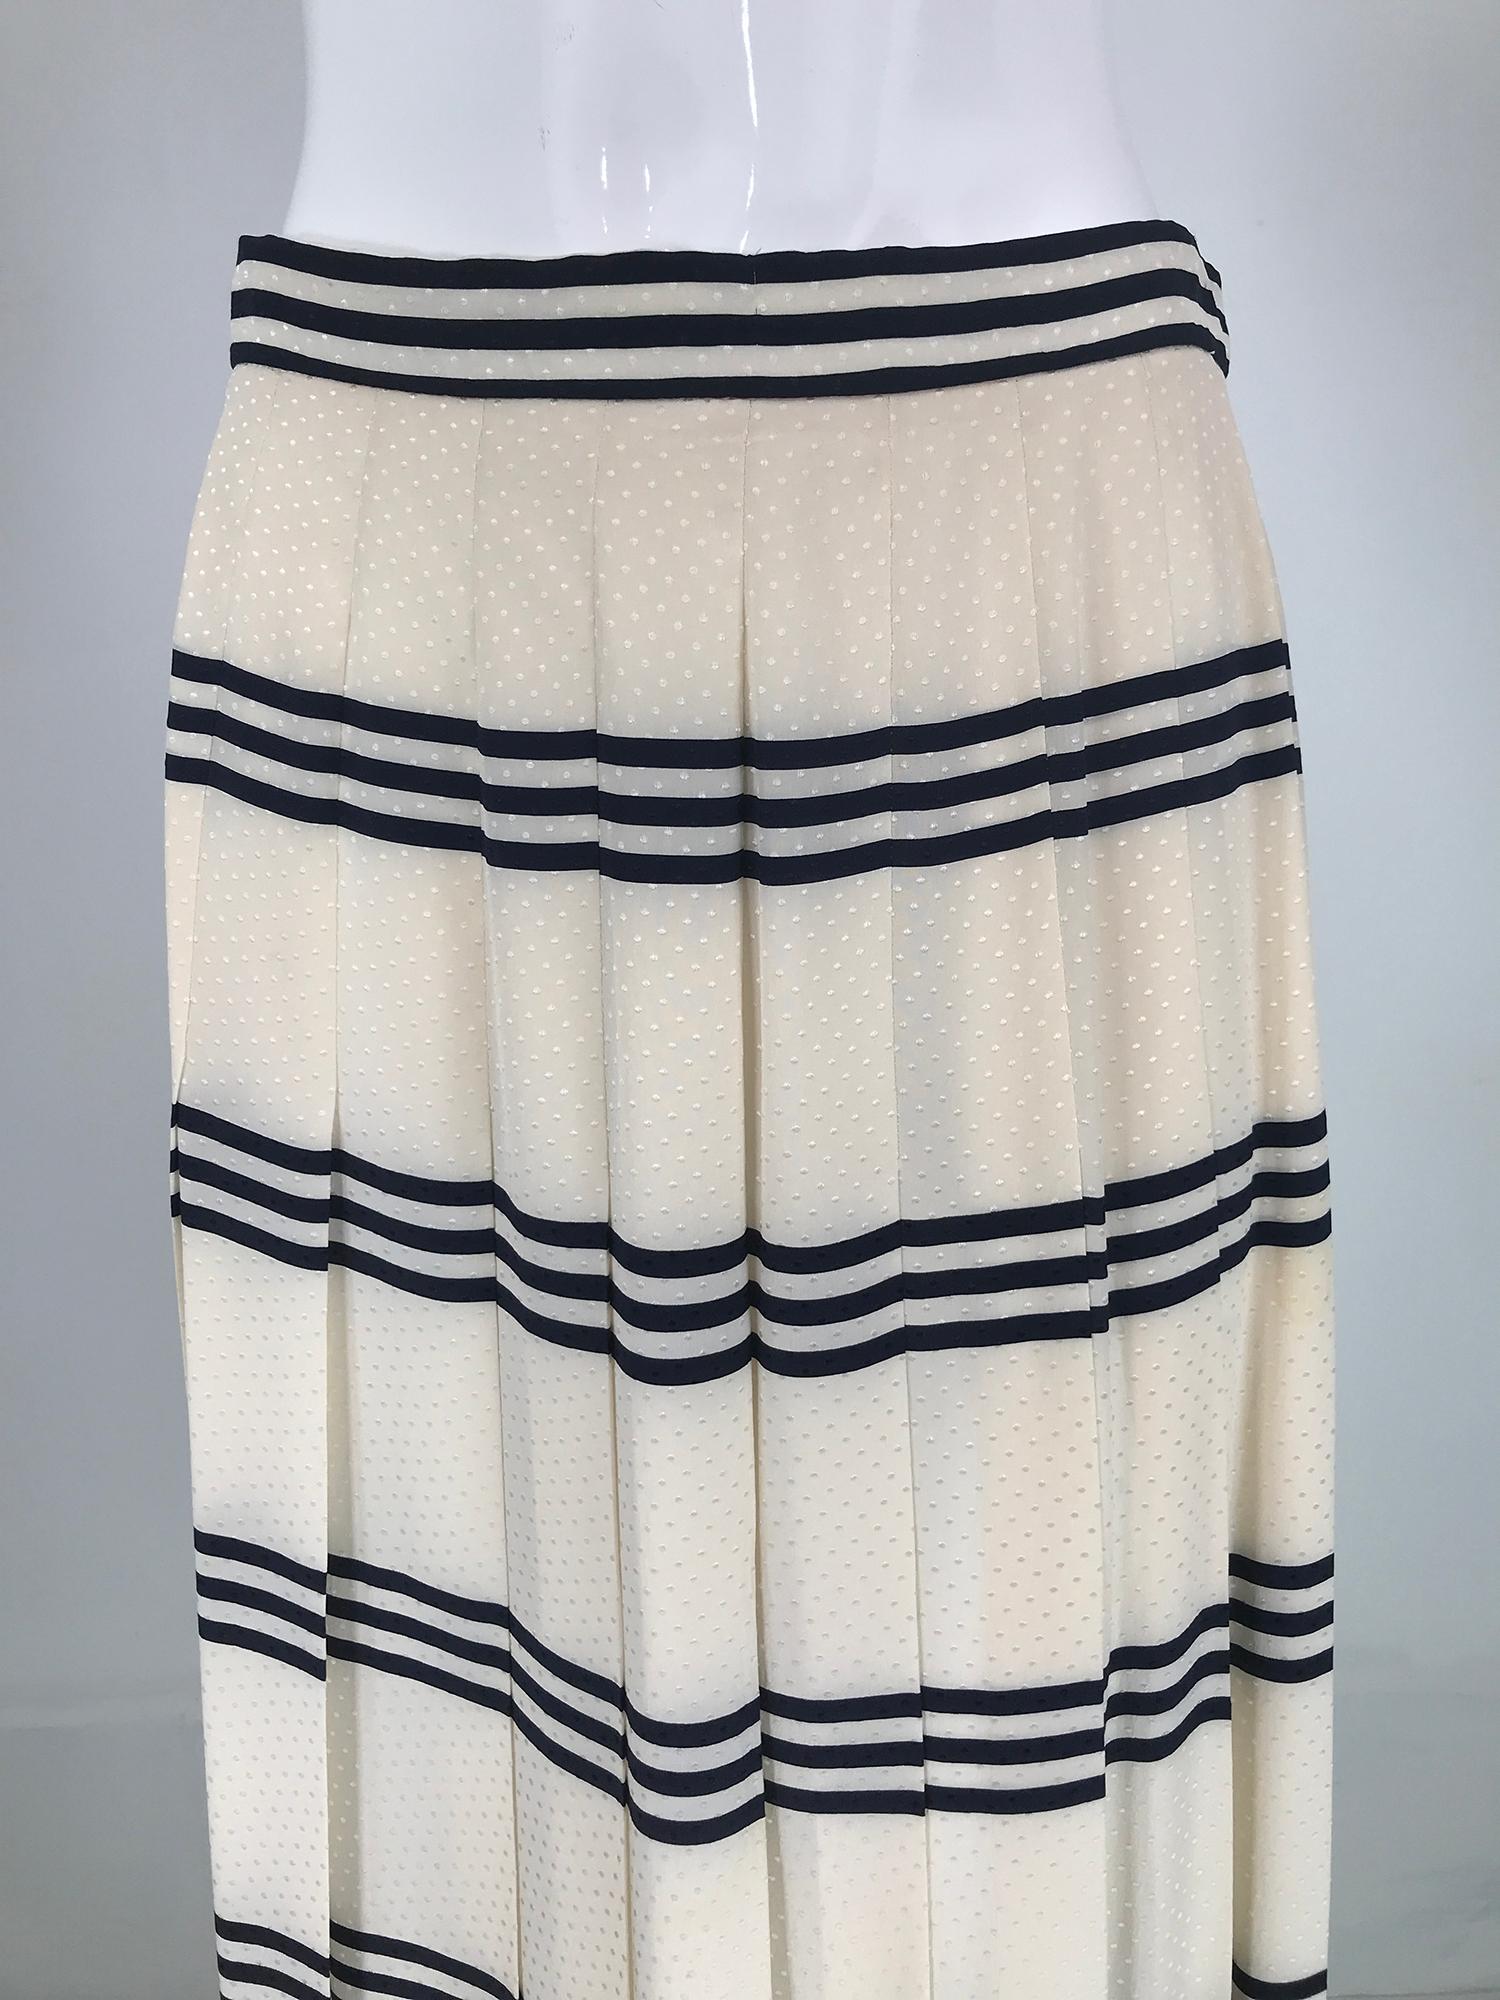 Gloria Sachs cream & black horizontal stripe silk jacquard, with mini dots, long stitch down pleated skirt from the 1980s. Band waist skirt has stitch down pleats, unlined. Closes at the waist side with a bar hook & zipper. From the 1980s.  Marked